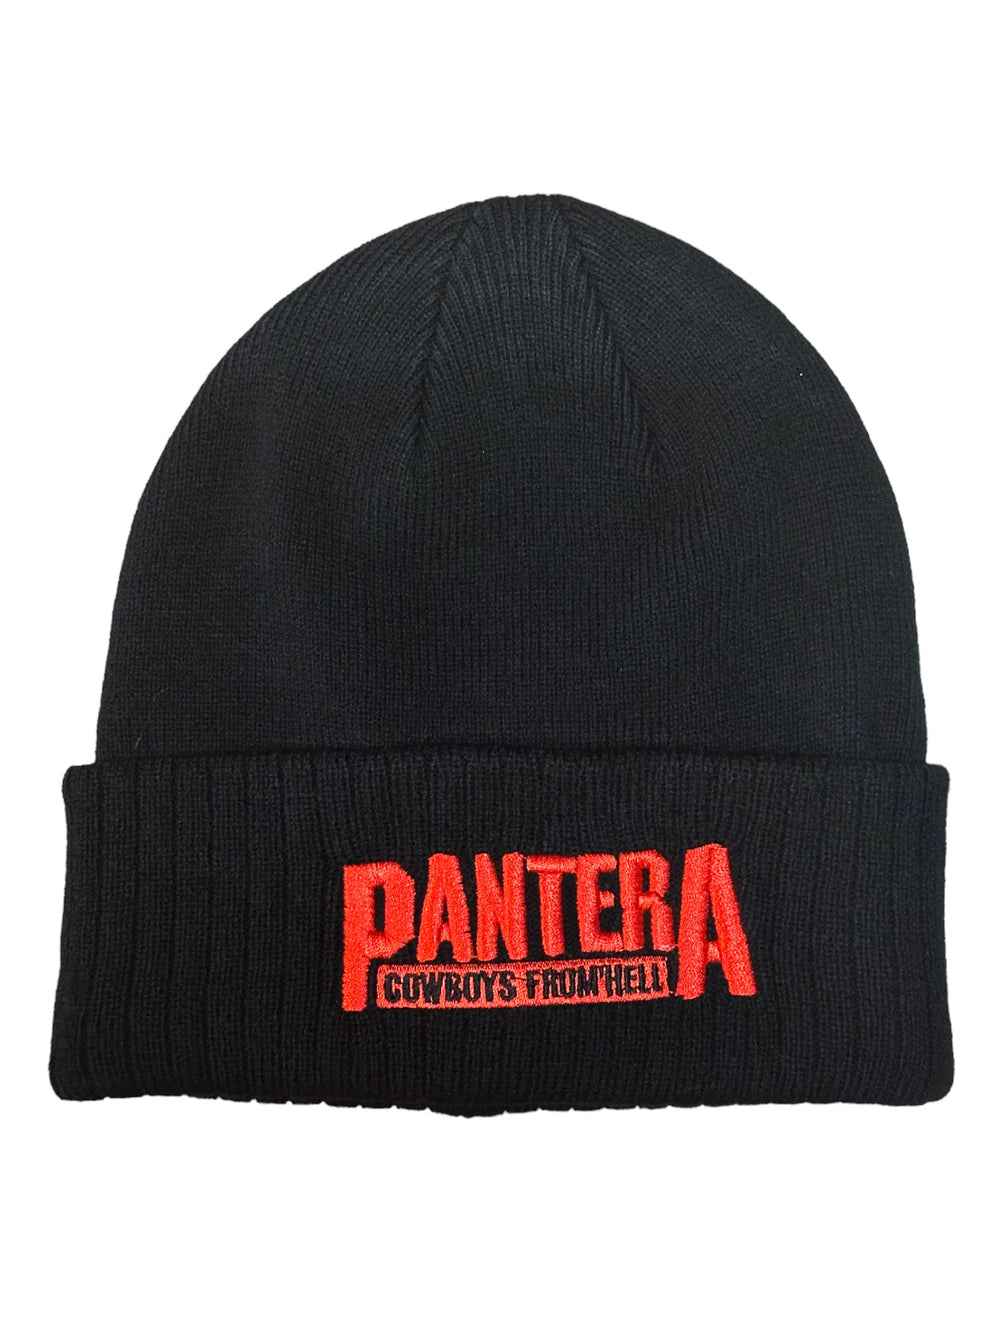 Pantera - Cowboys From Hell Official Beanie Hat One Size Fits All NEW